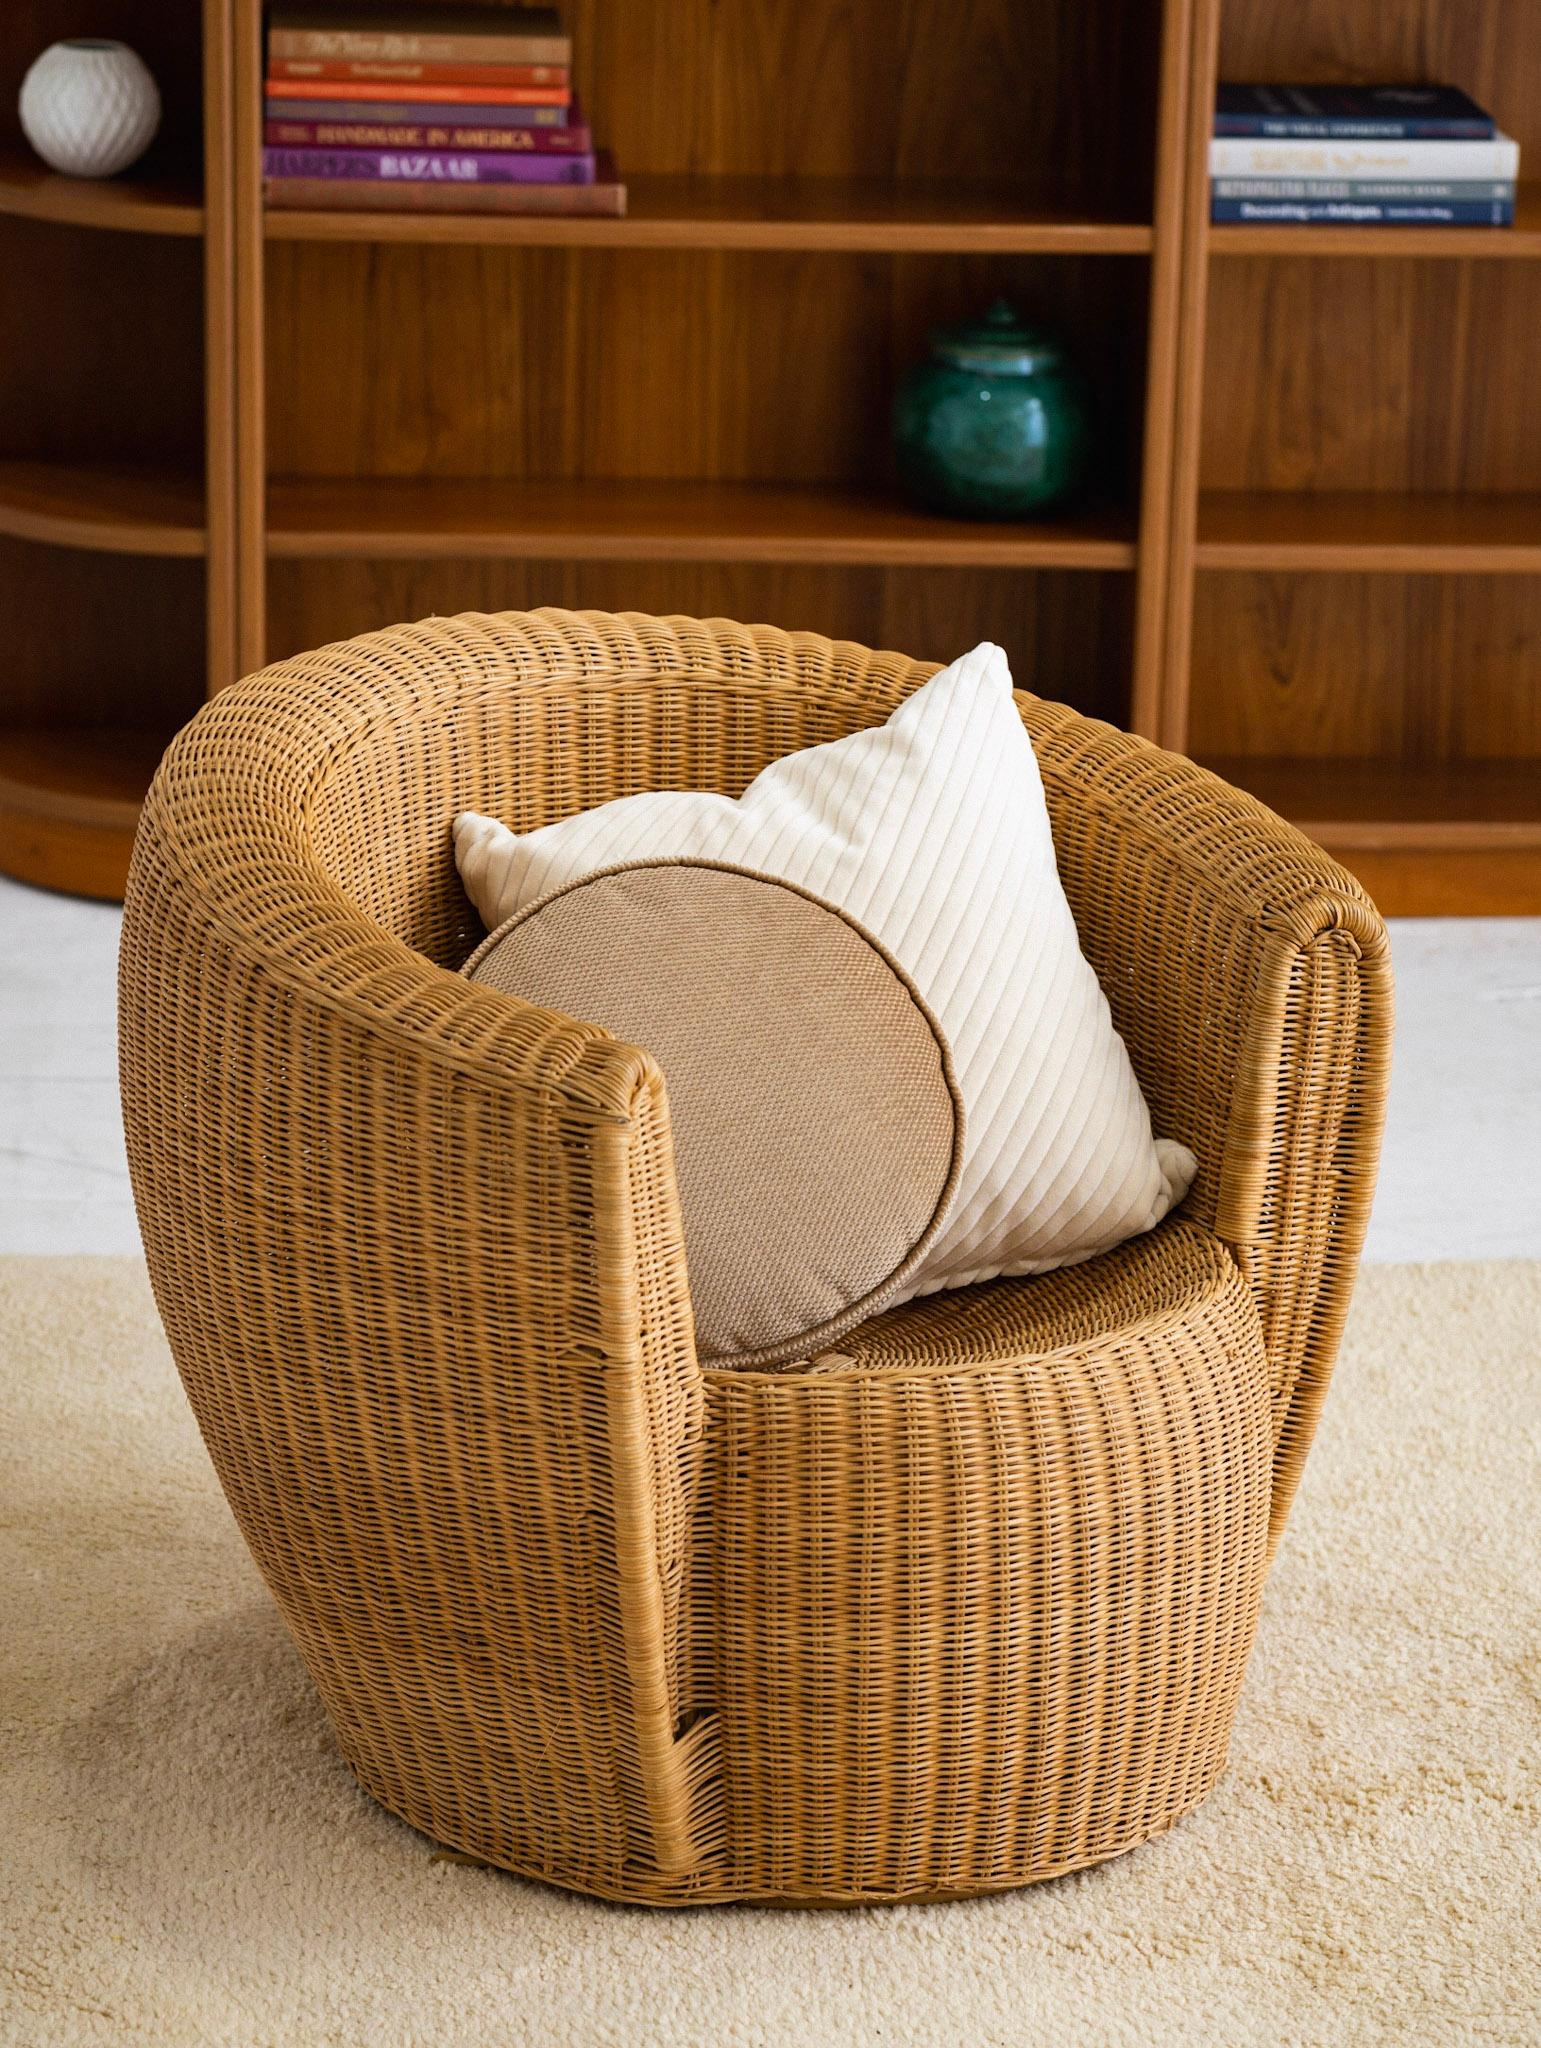 1980s wicker barrel chair. A seat cushion is recommended for more comfortable use.